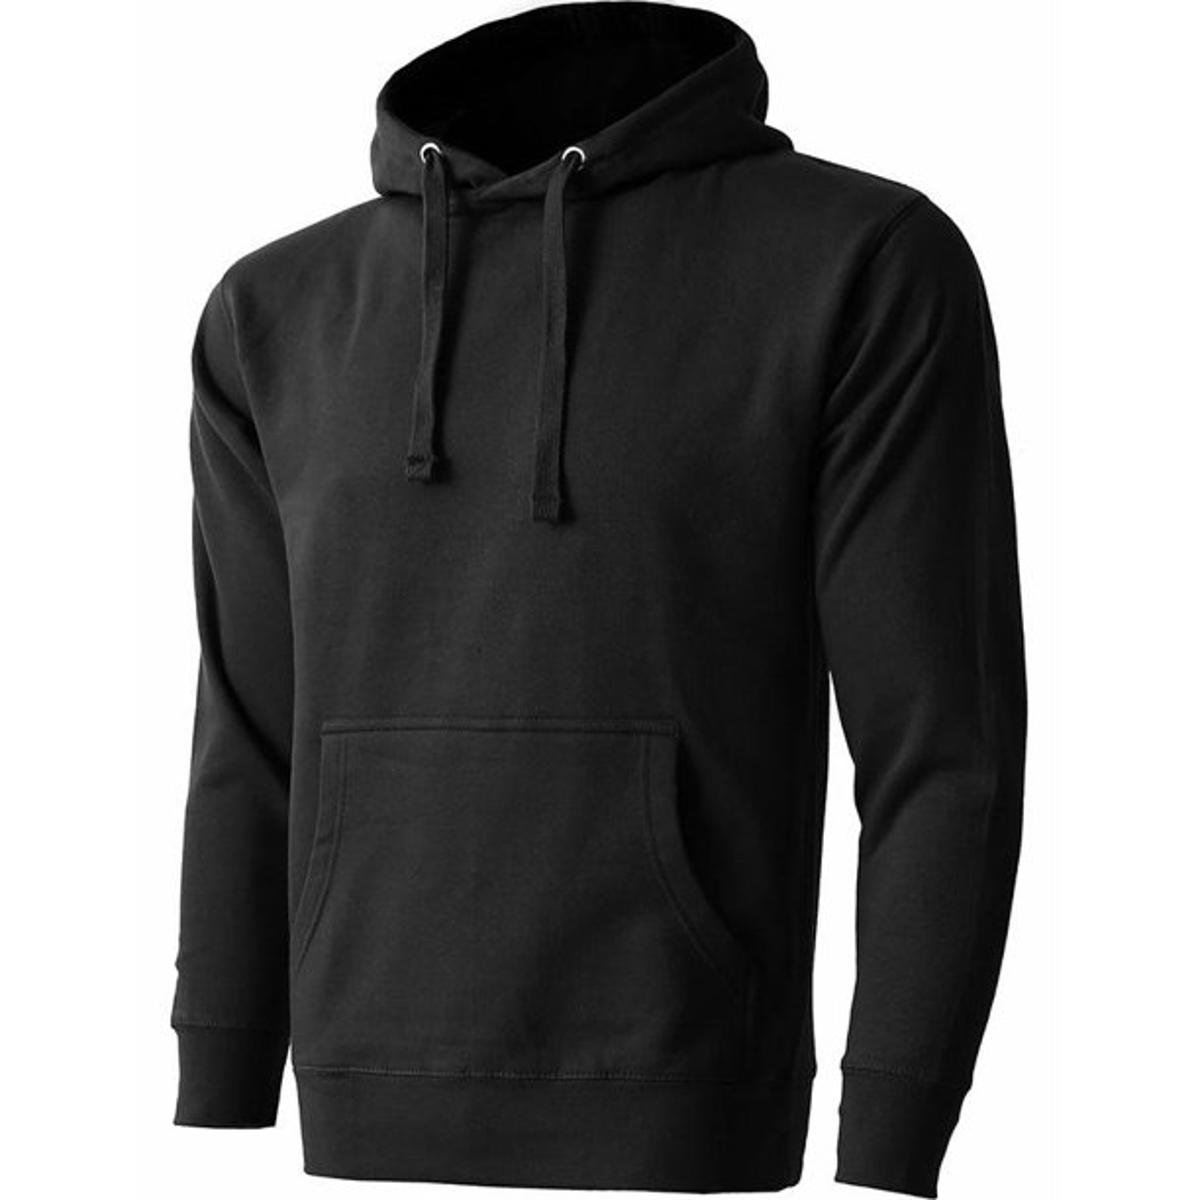 Flexible and Agreeable Hoodies - Render Knowledge